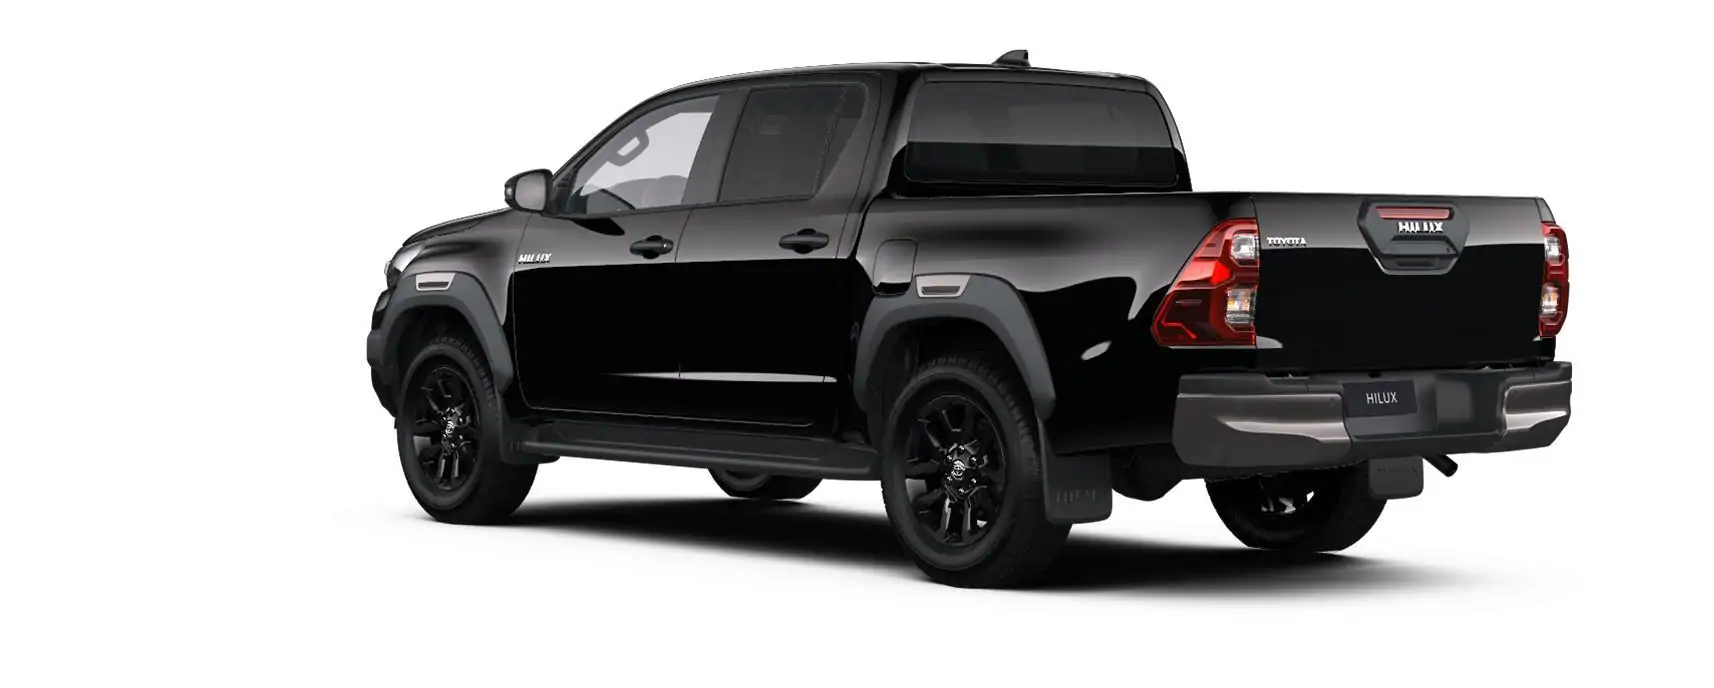 Nieuw Toyota Hilux 4x4 Double Cab 2.8 204hp 6AT Invincible LHD 218 - ATTITUDE BLACK 2